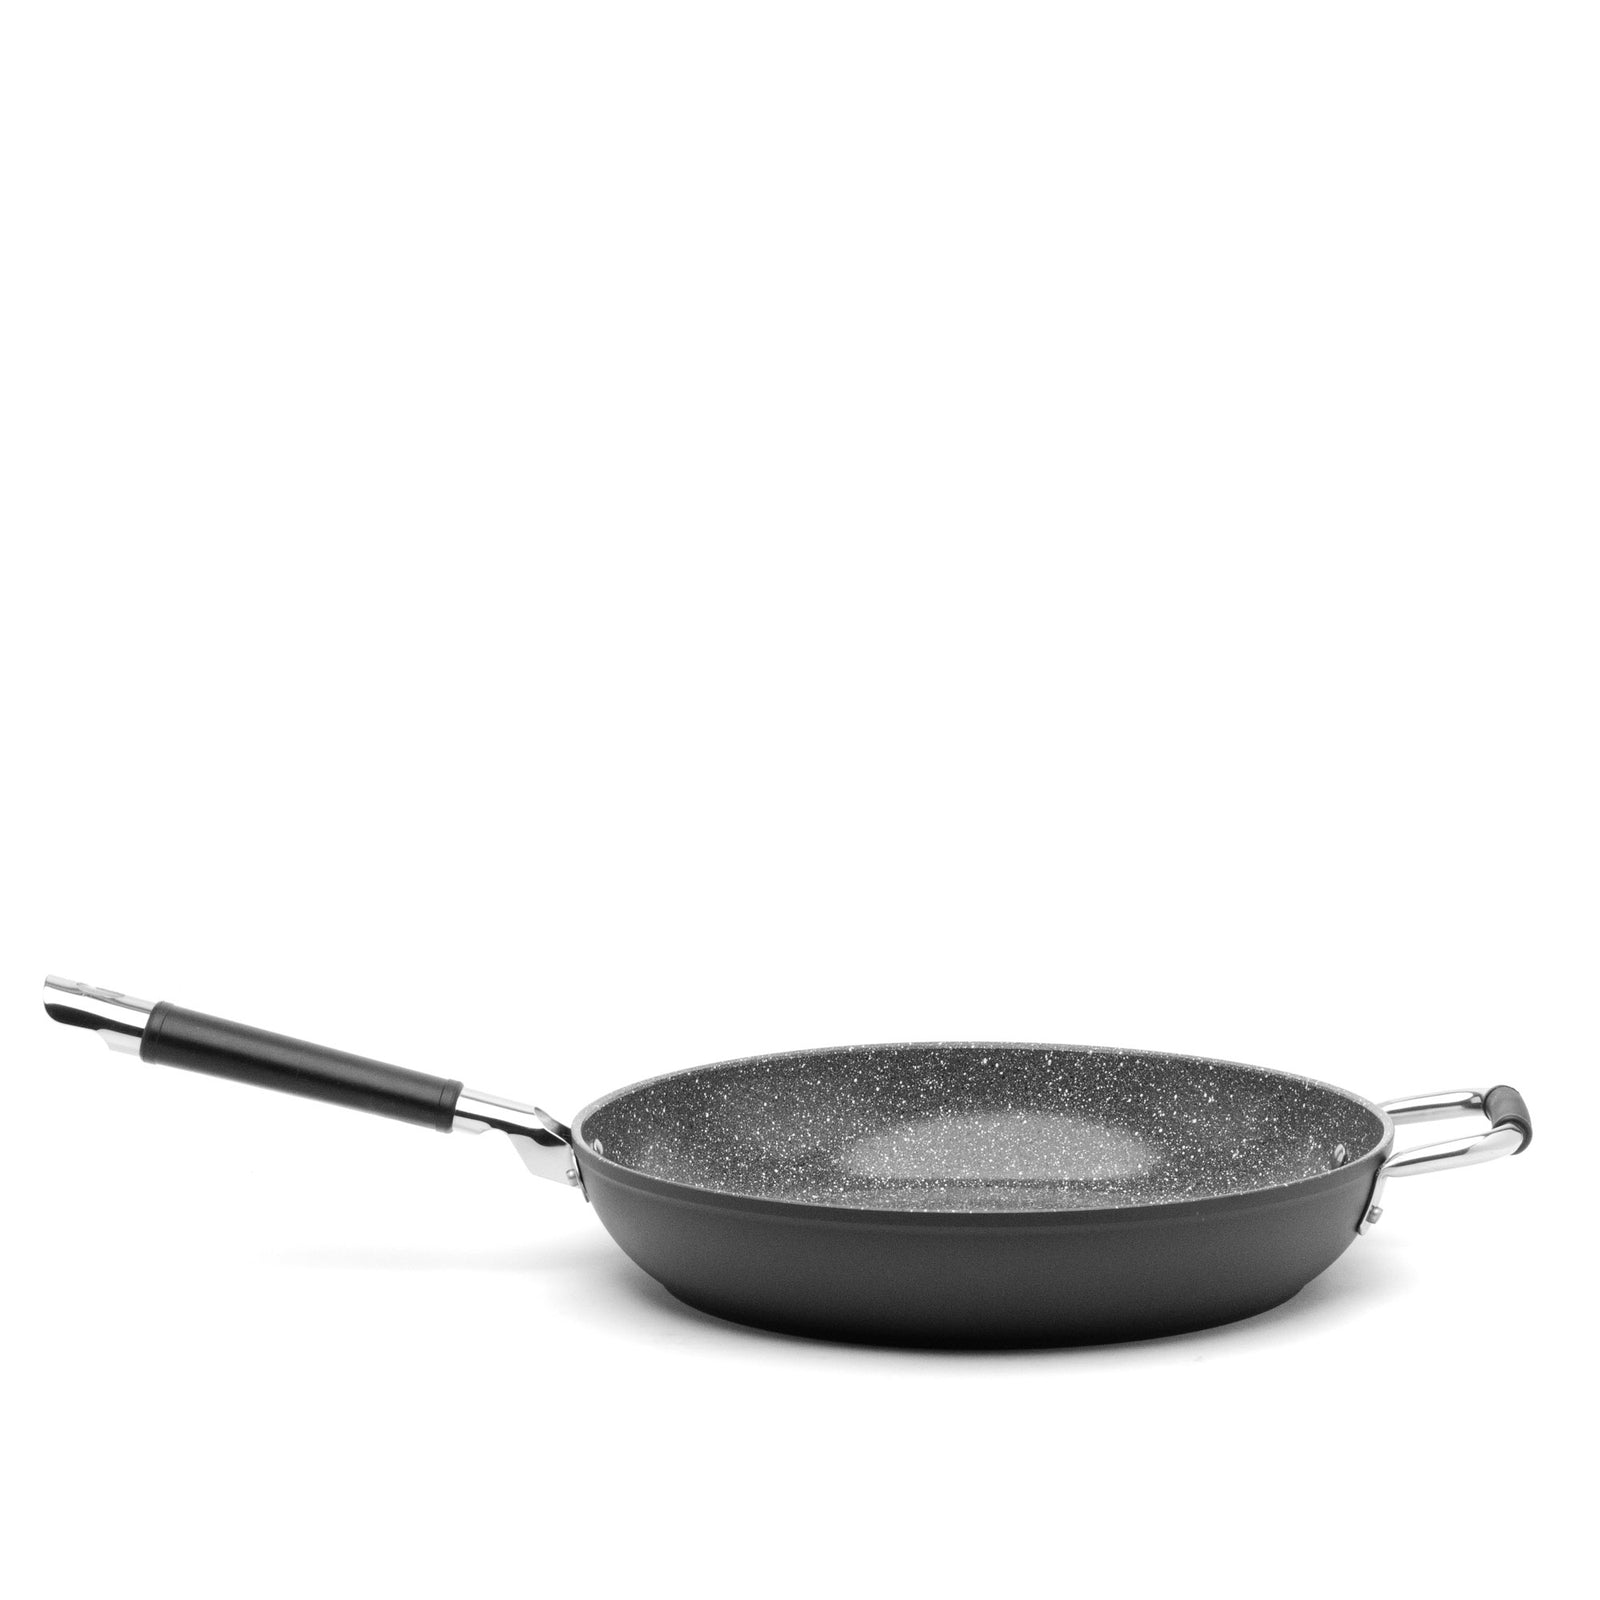  Kamberg Fish Frying Pan 35 cm with Removable Handle Cast  Aluminium Stone Coating for All Heat Sources Including Induction PFOA Free:  Home & Kitchen